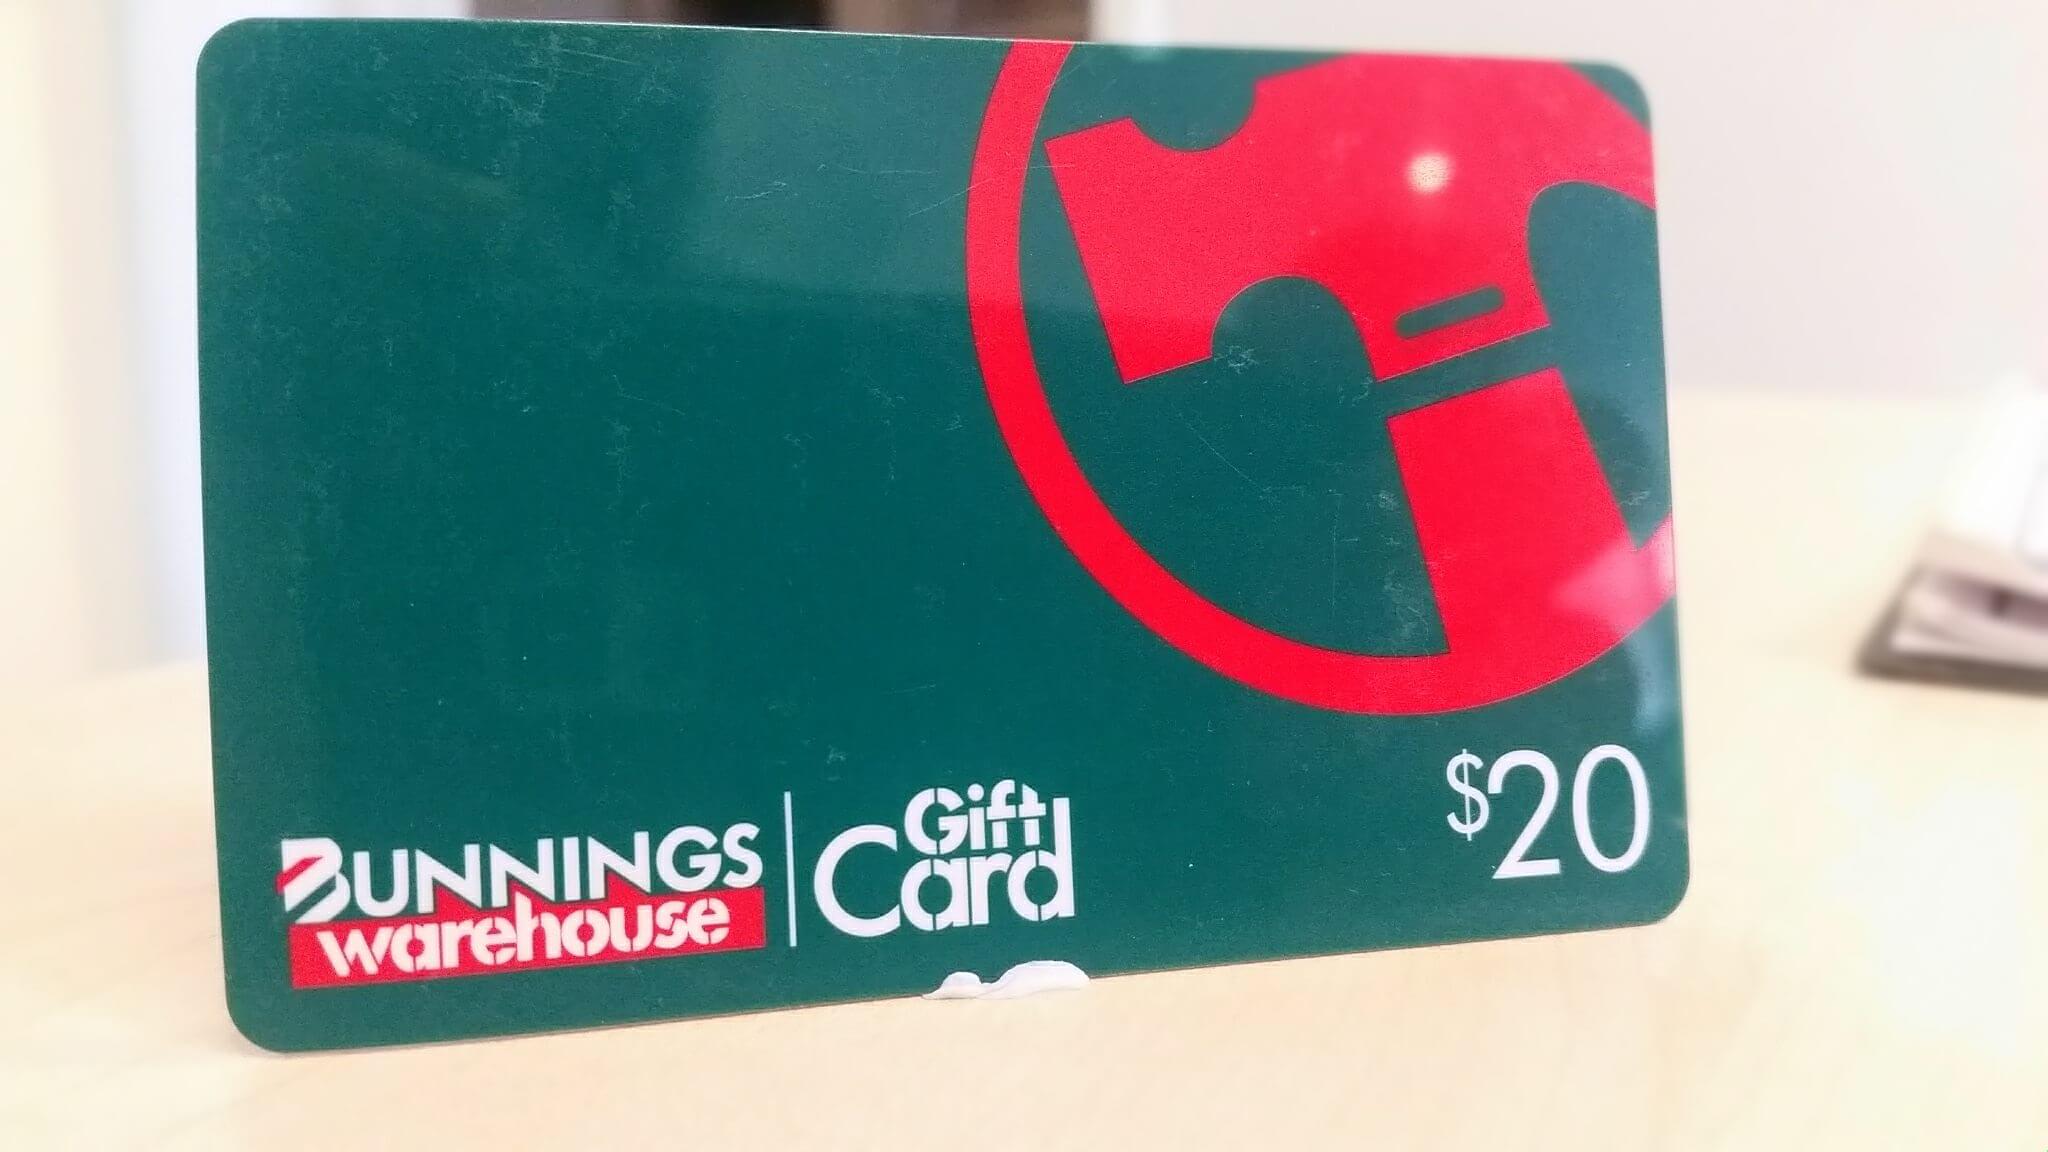 Bunnings $20 gift card giveaway for Homemasters building and pest inspections company